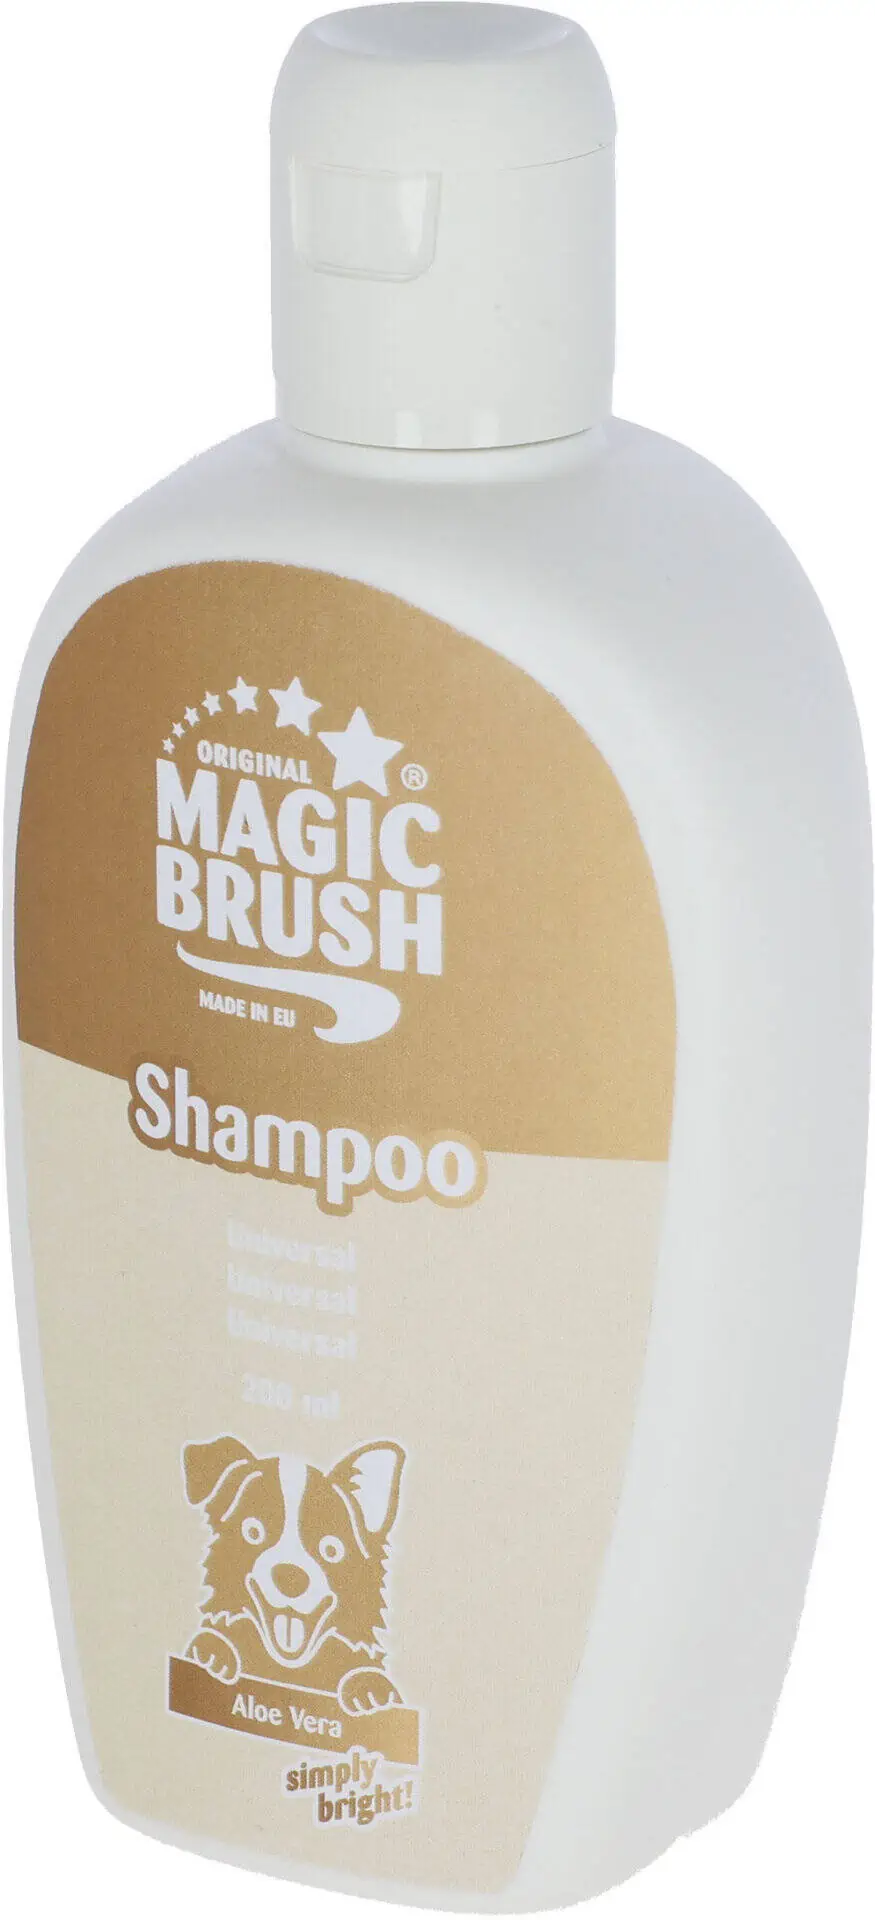 MagicBrush Shampooing universel pour chiens, 200 ml